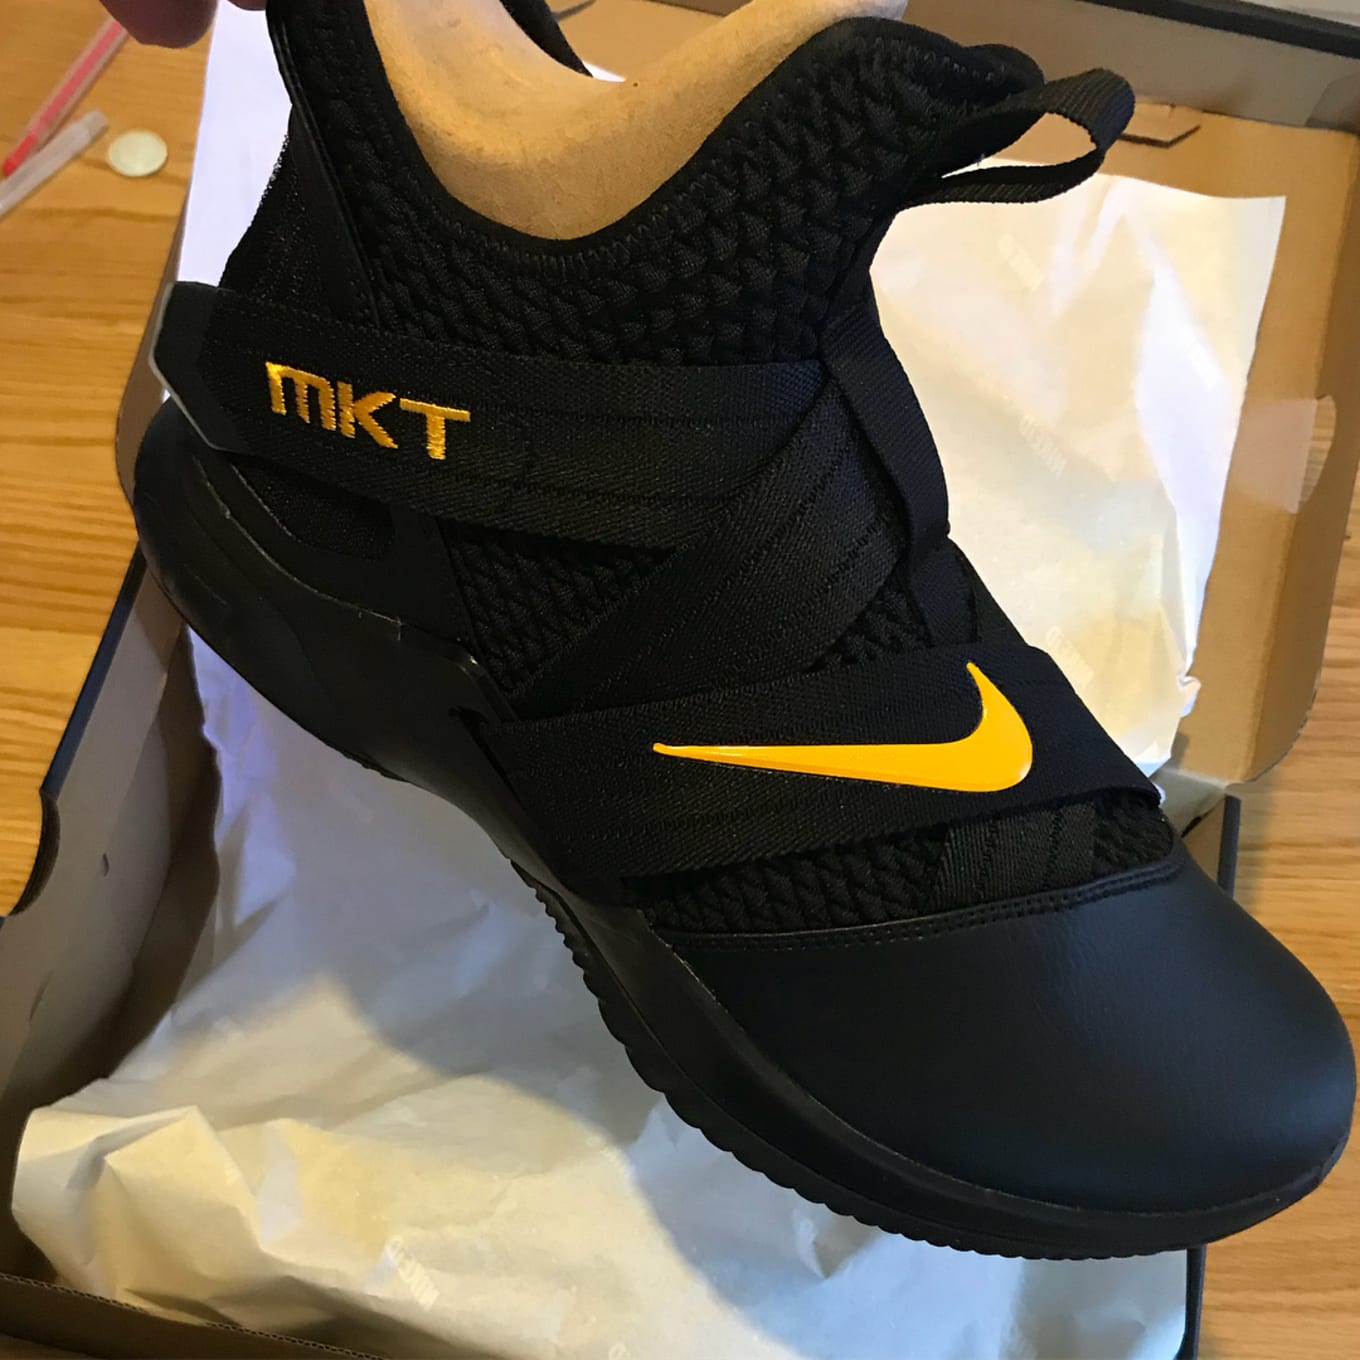 lebron soldier 12 black and gold cheap 